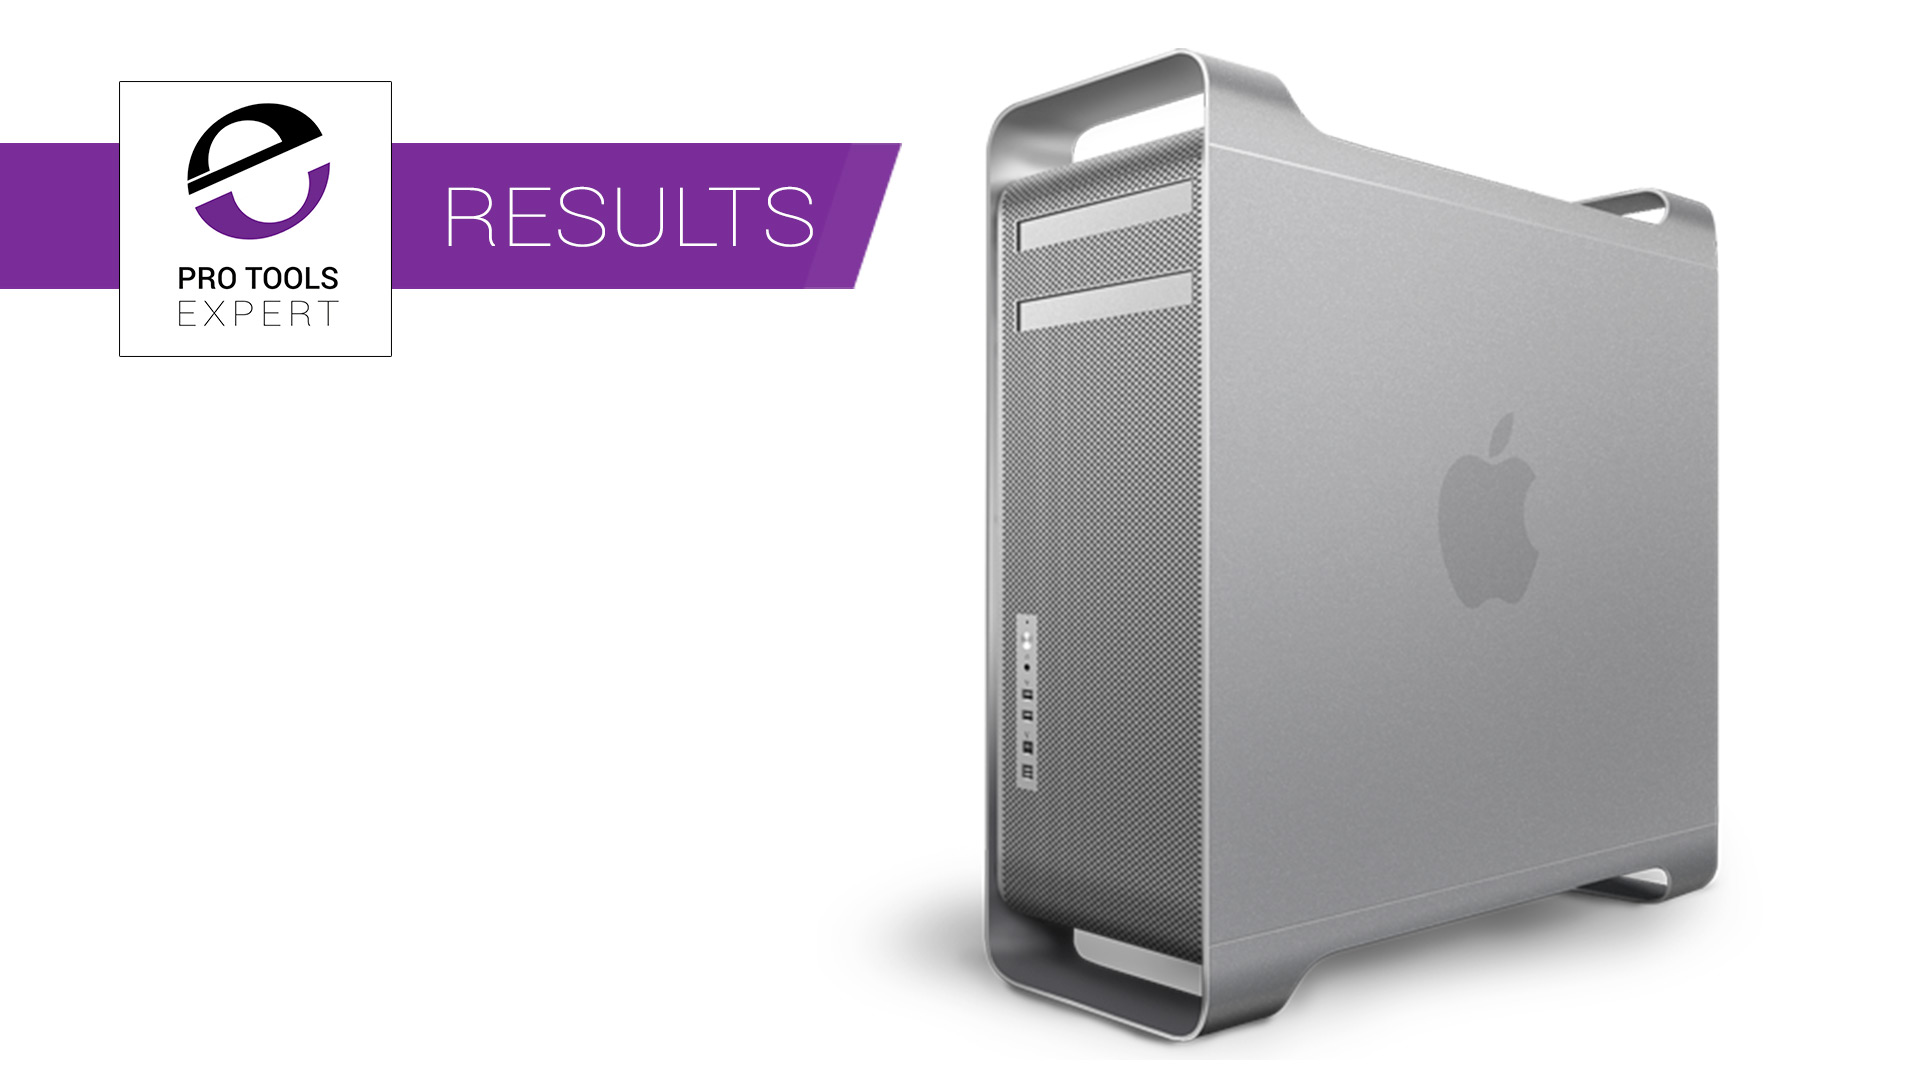 Kısmak çorba üslup  Replacing A Mac Pro 5.1 'Cheese-grater' For Pro Tools - Wait For Next 2018 Mac  Pro 7.1 Voted Most Popular Solution | Pro Tools - The leading website for  Pro Tools users